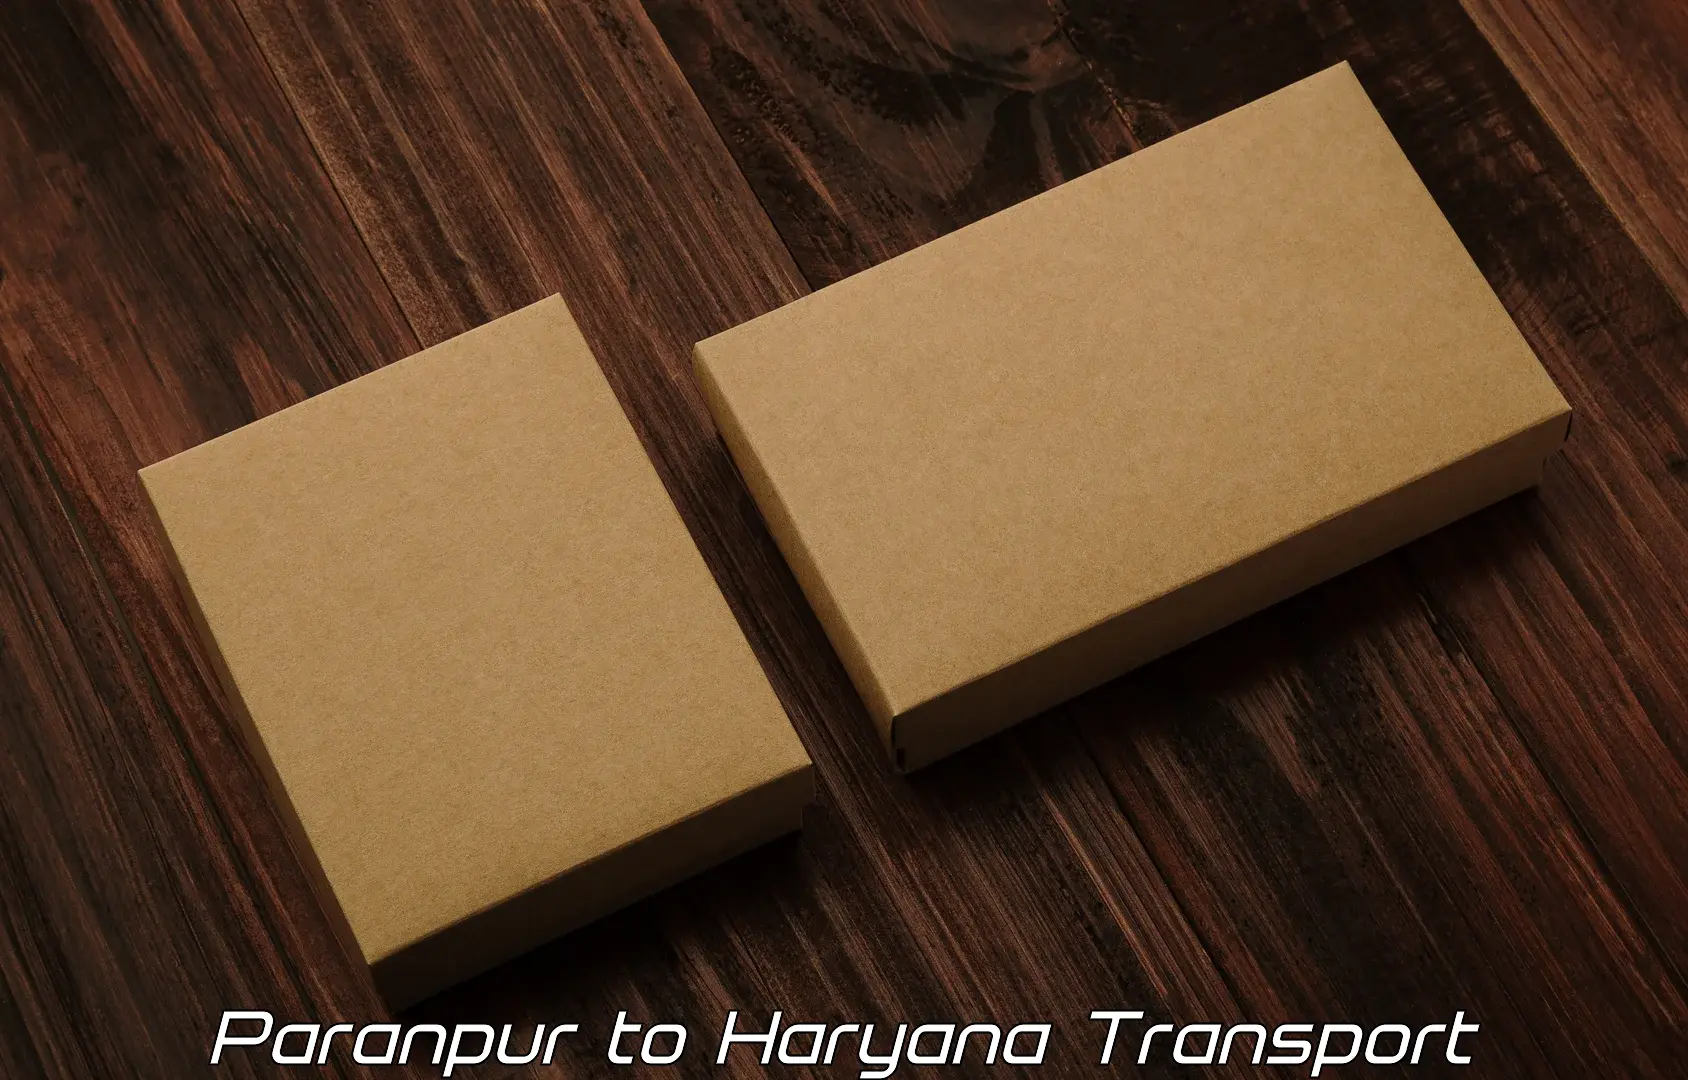 Best transport services in India Paranpur to Gurugram